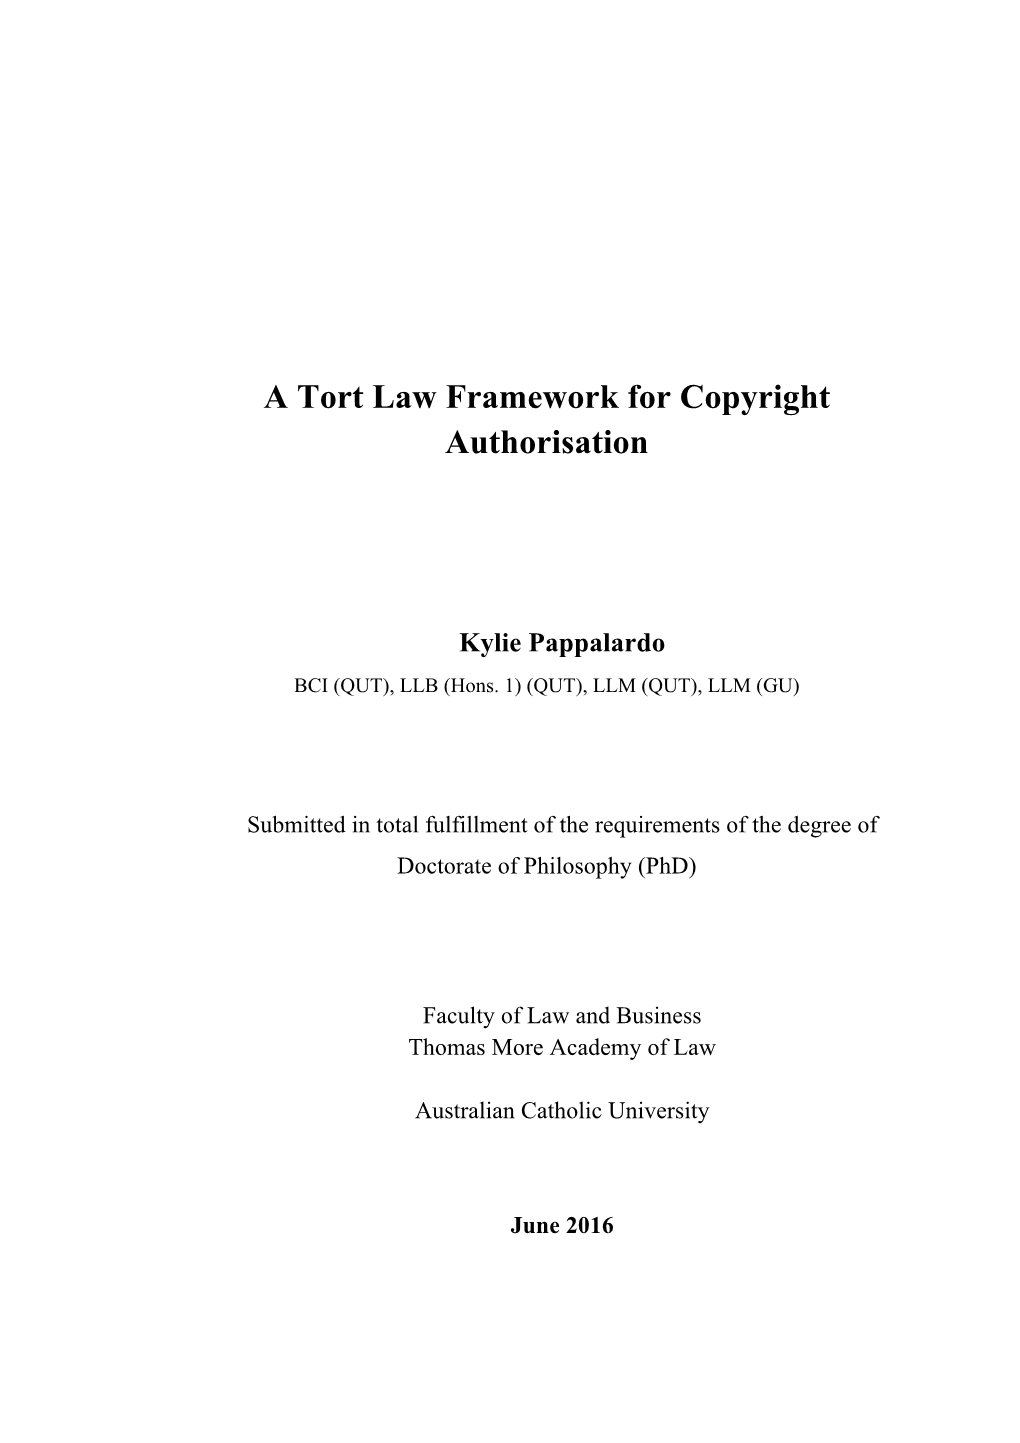 A Tort Law Framework for Copyright Authorisation